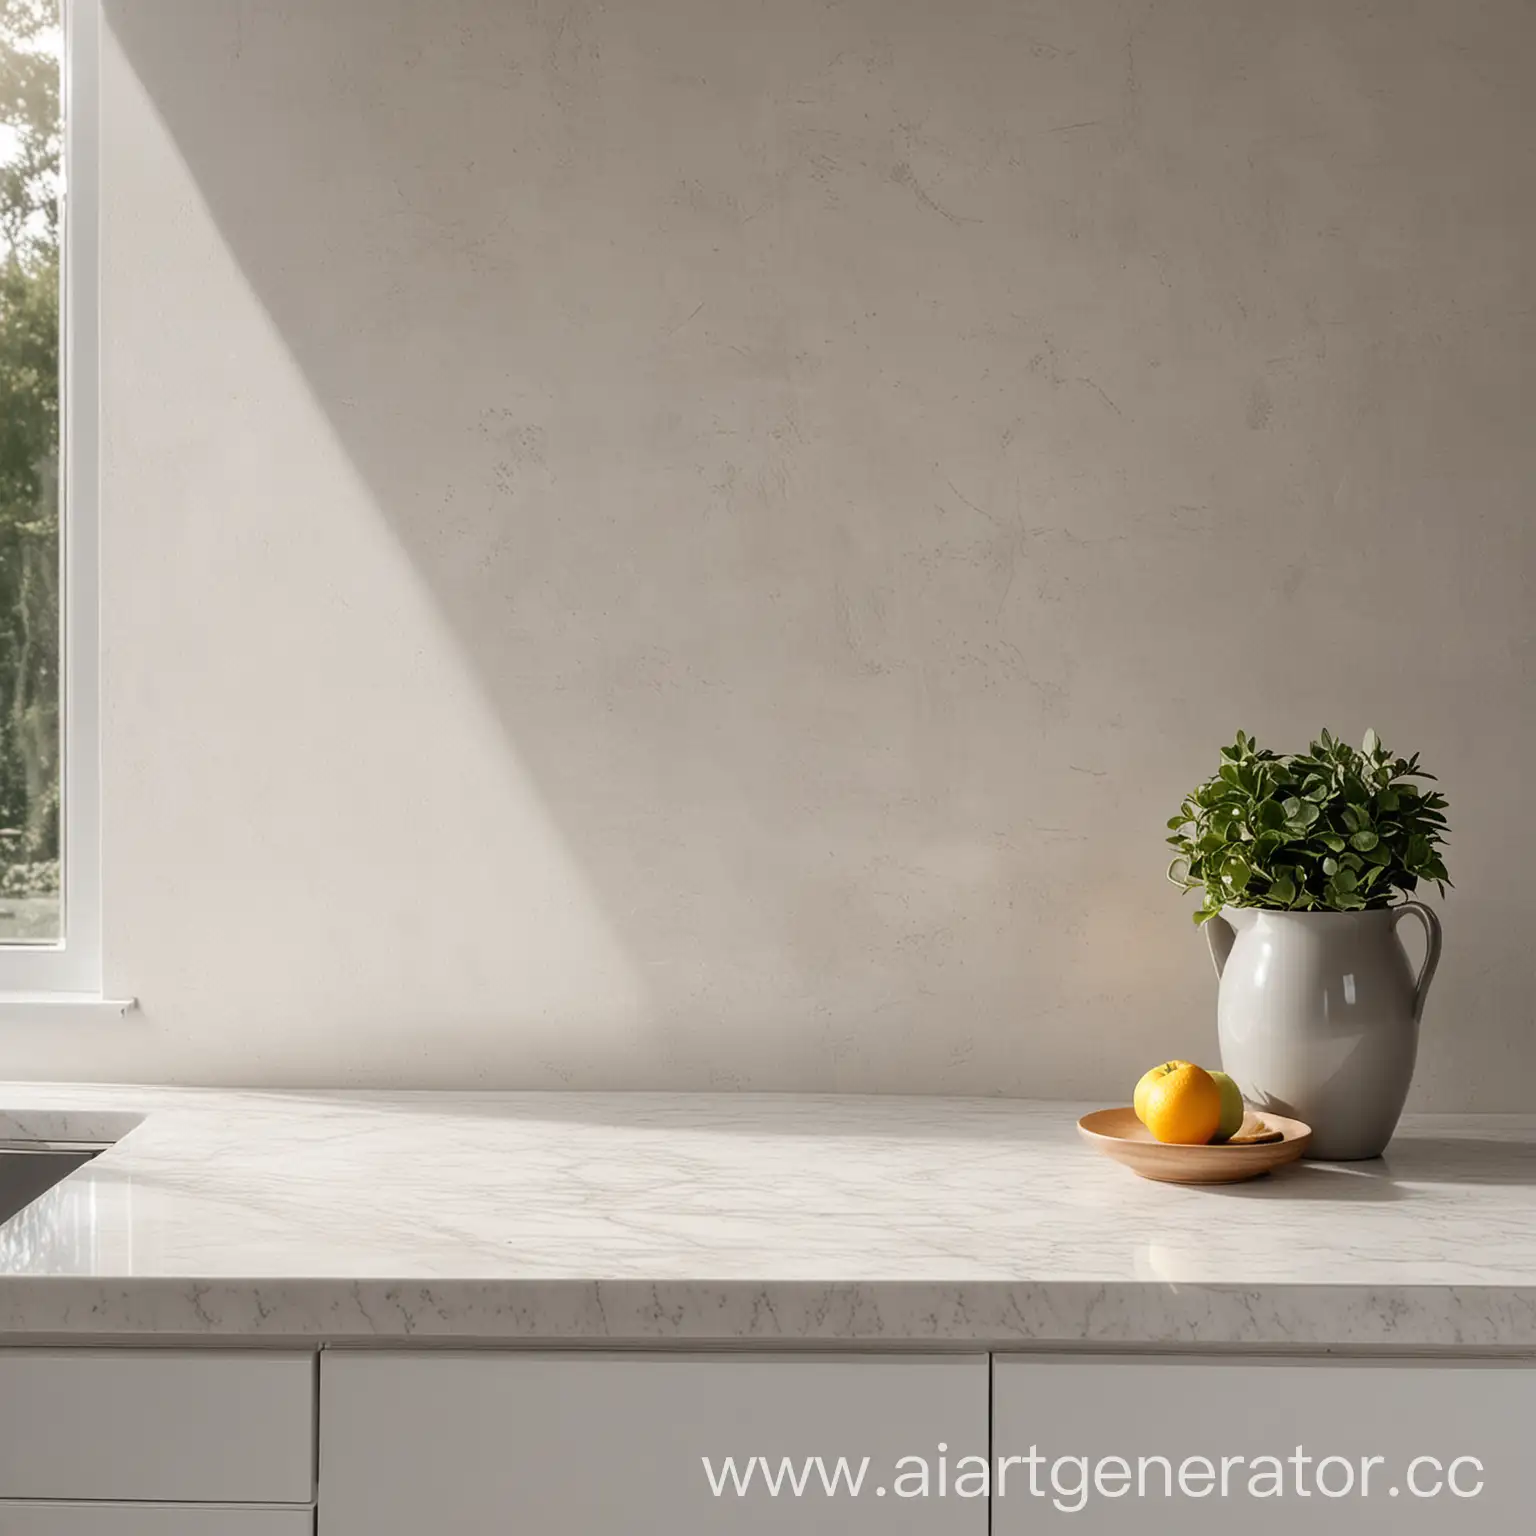 light countertop against a light gray wall with sun glares